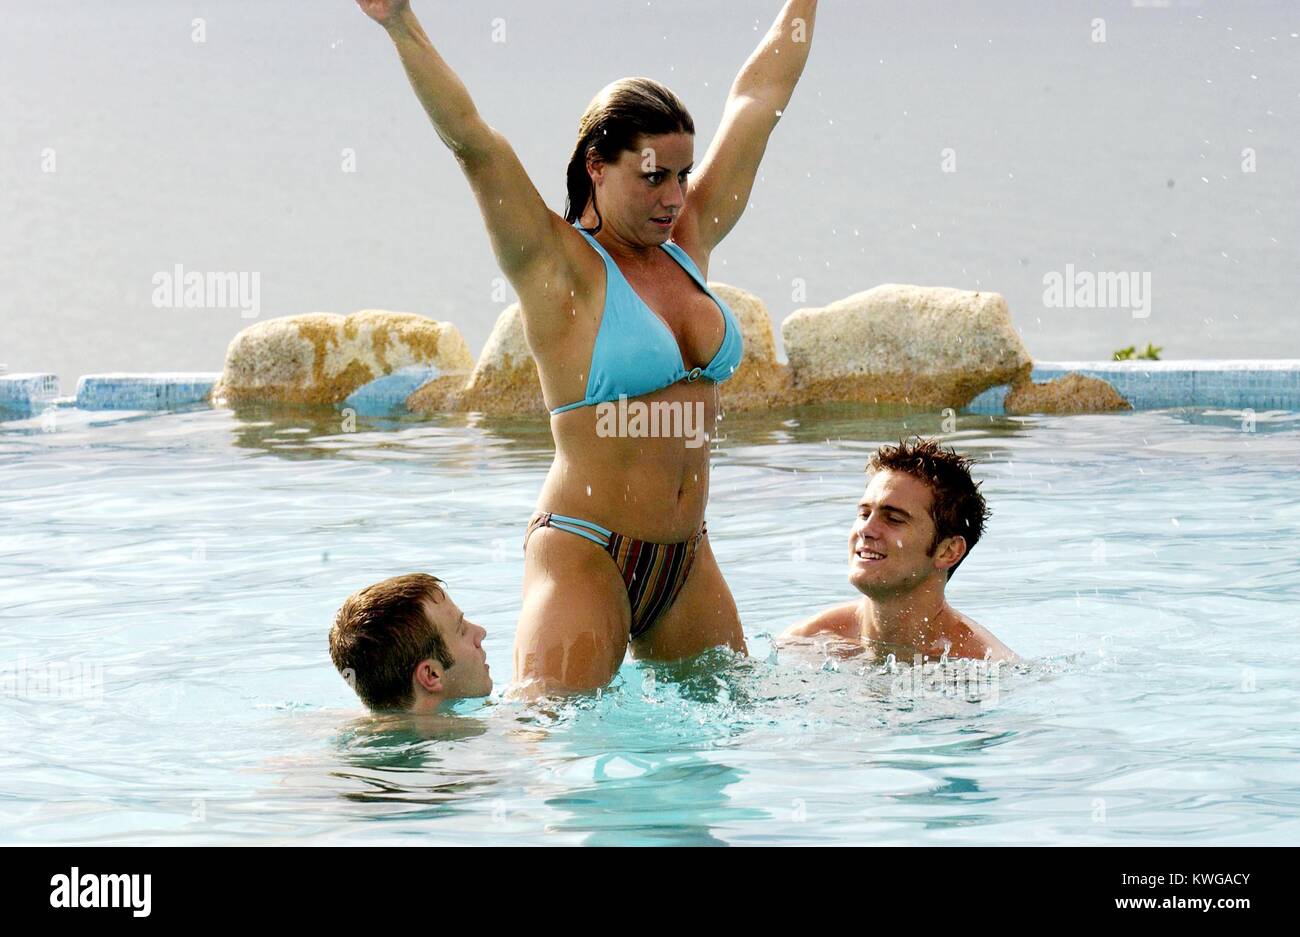 June 2, 2003 - Paradise Hotel: Toni (C) has fun in the pool with Beau (L)  and Alex (R) when they arrive at Paradise Hotel .Tv/Film Still. (Credit  Image: © Entertainment Pictures/ZUMApress.com